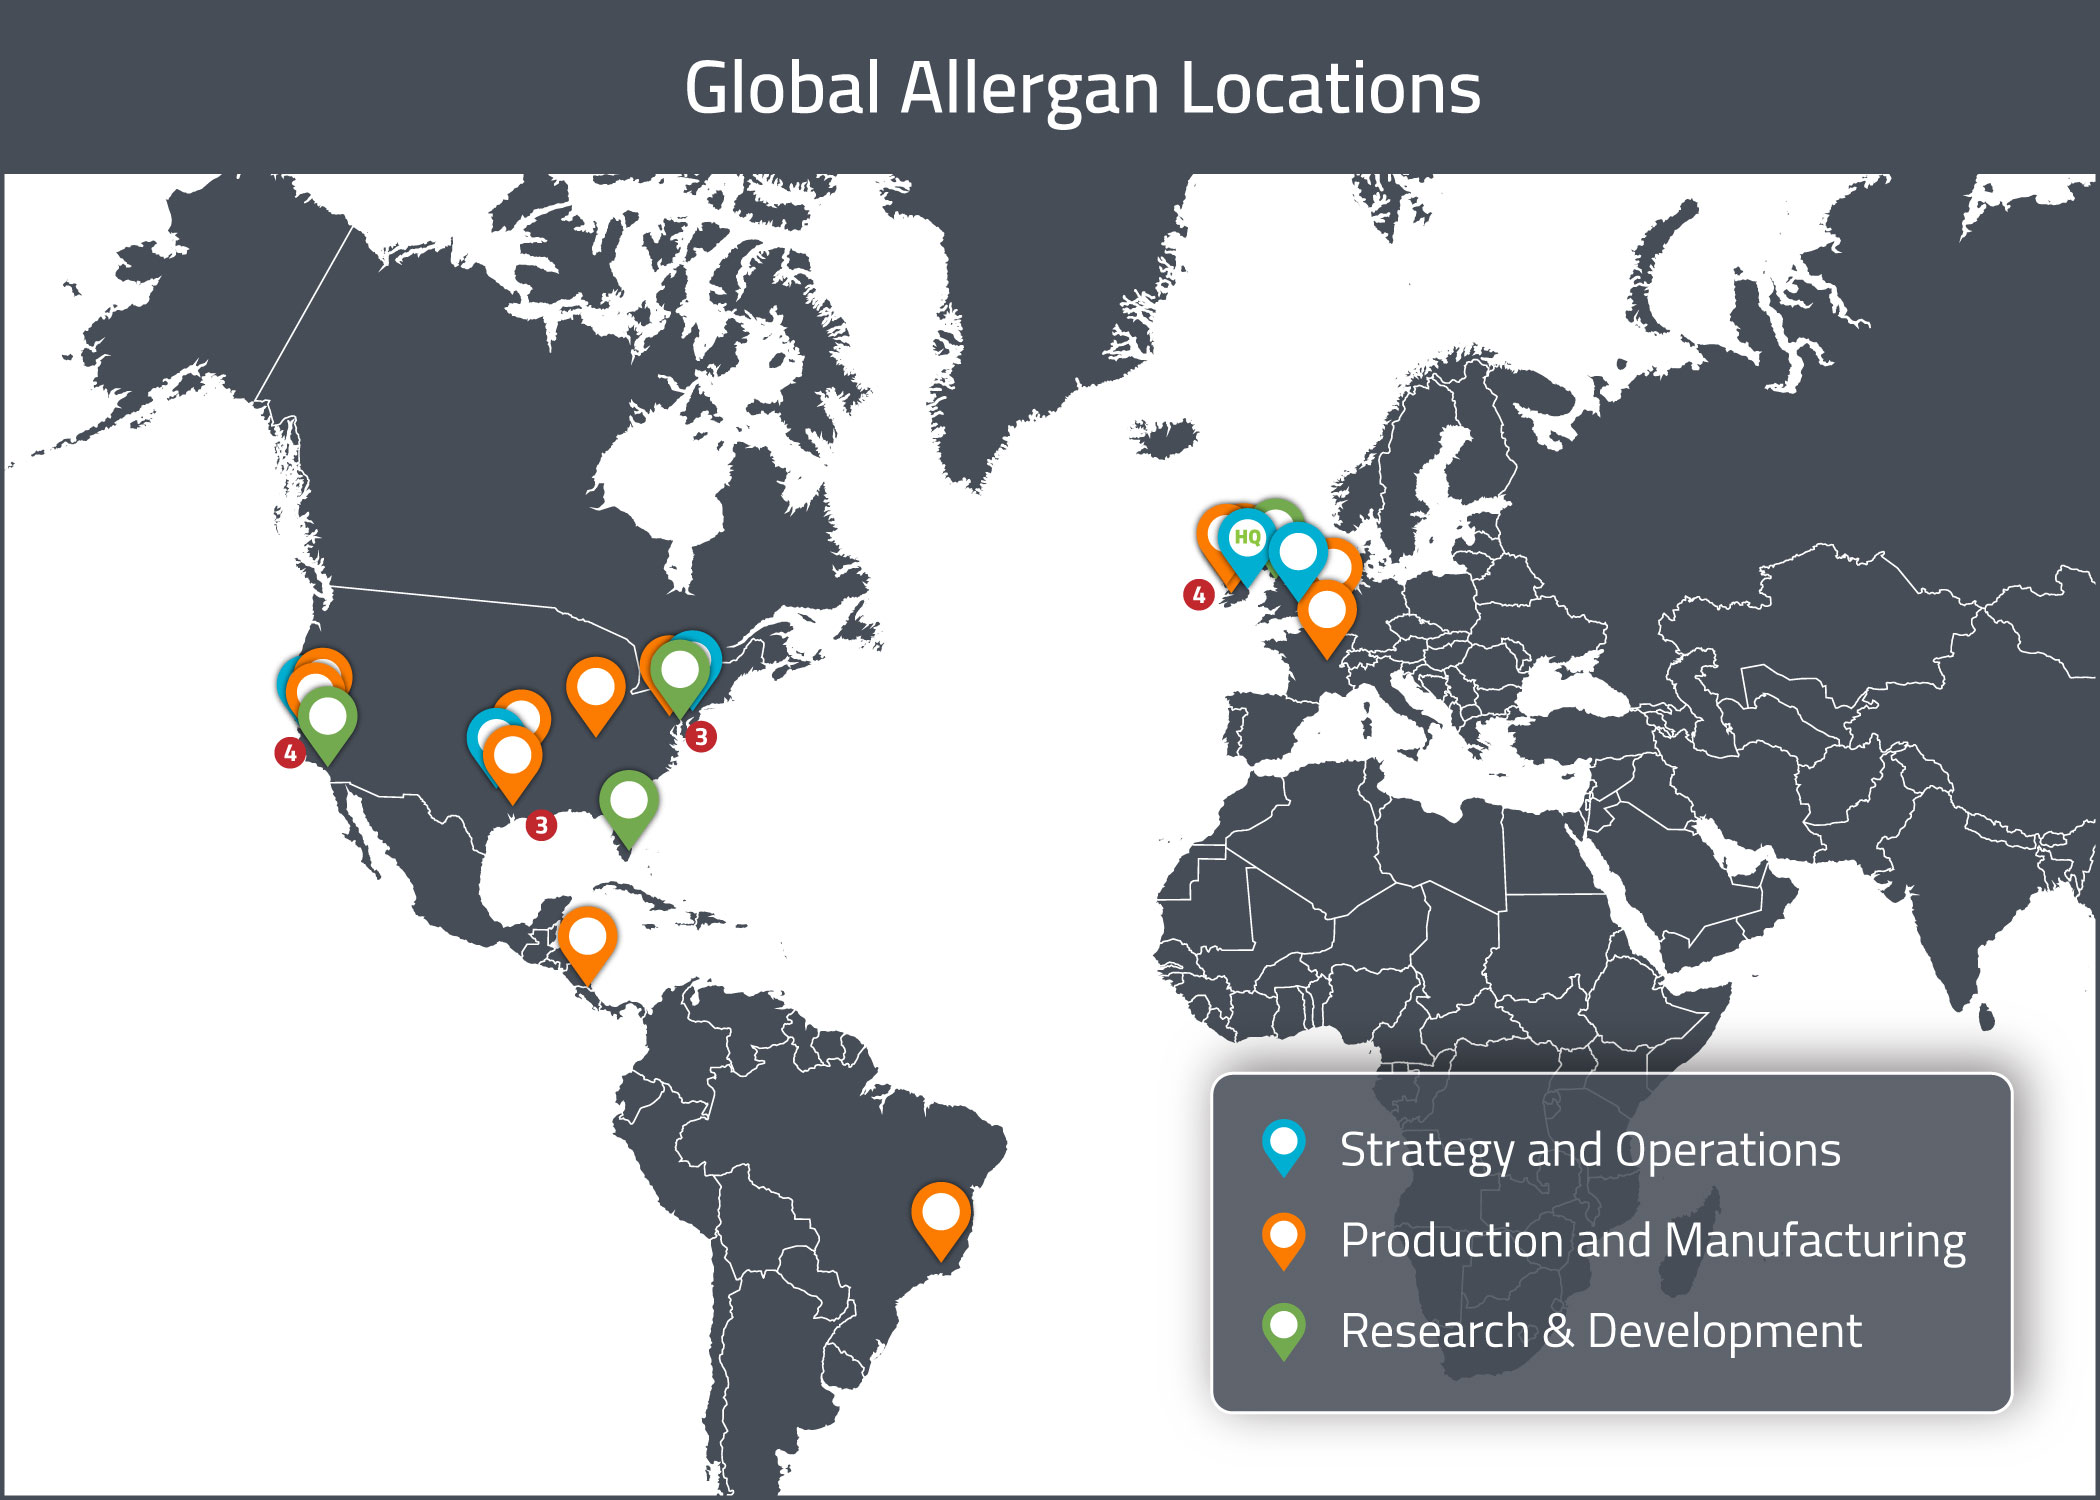 A visual map of Allergan's global offices and locations